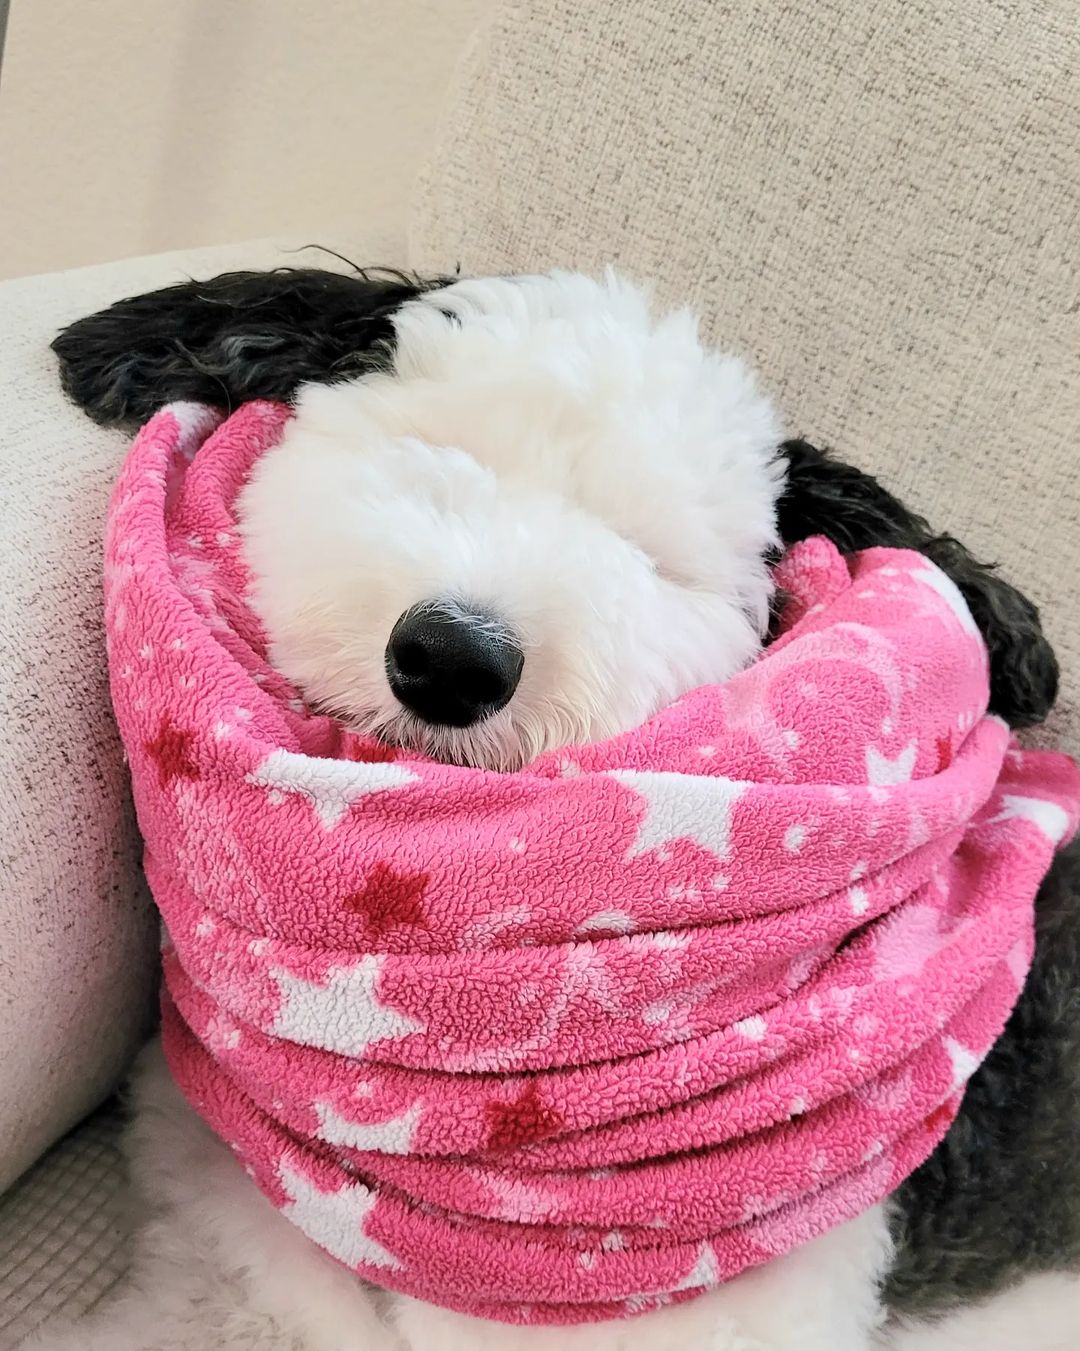 Bayley, the dog who looks like Snoopy, wrapped in pink blanket with stars on it.